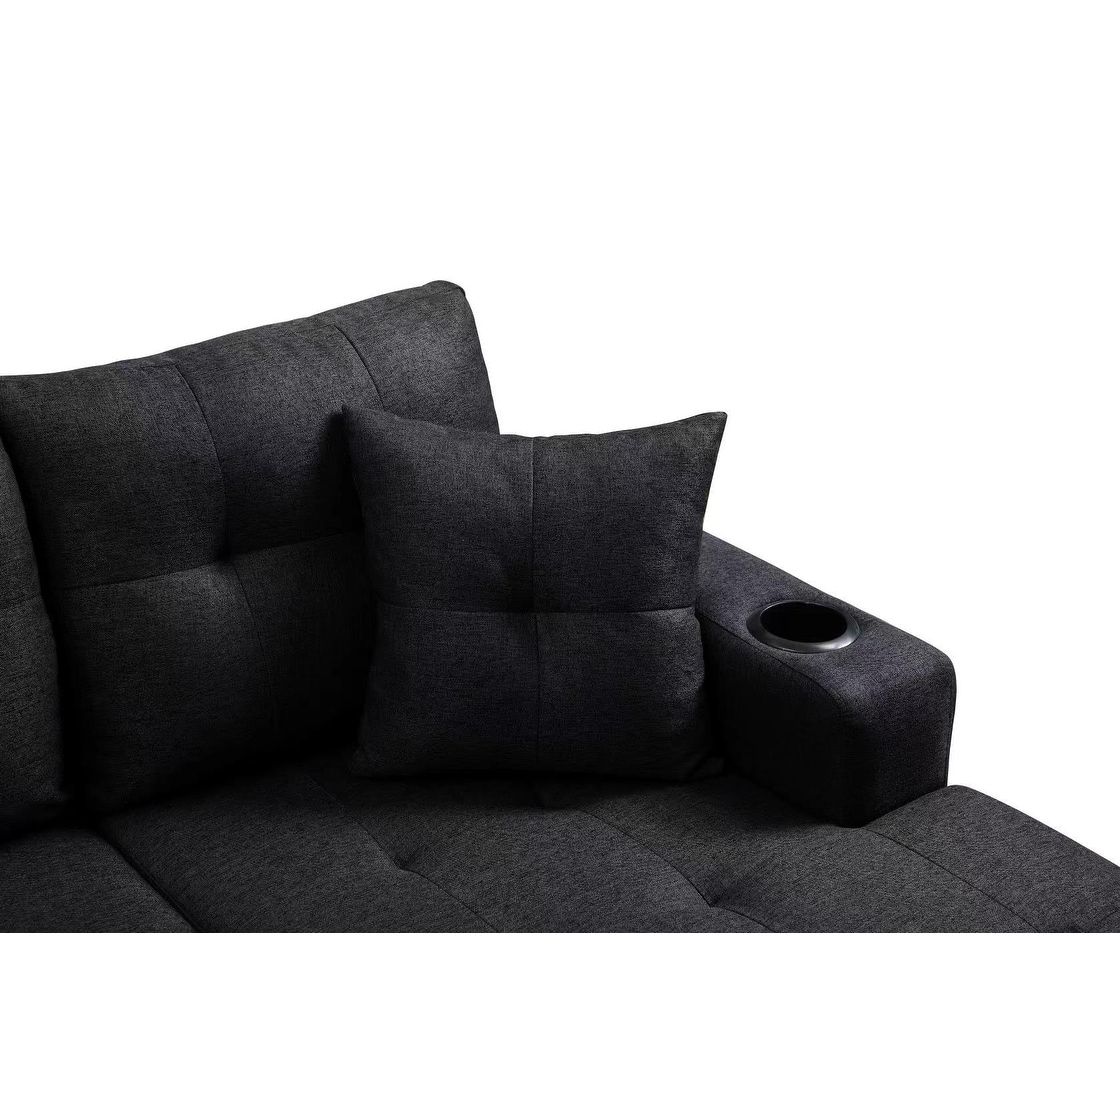 Sectional Sofa Left with Footrest, Convertible Corner Sofa with Armrest Storage